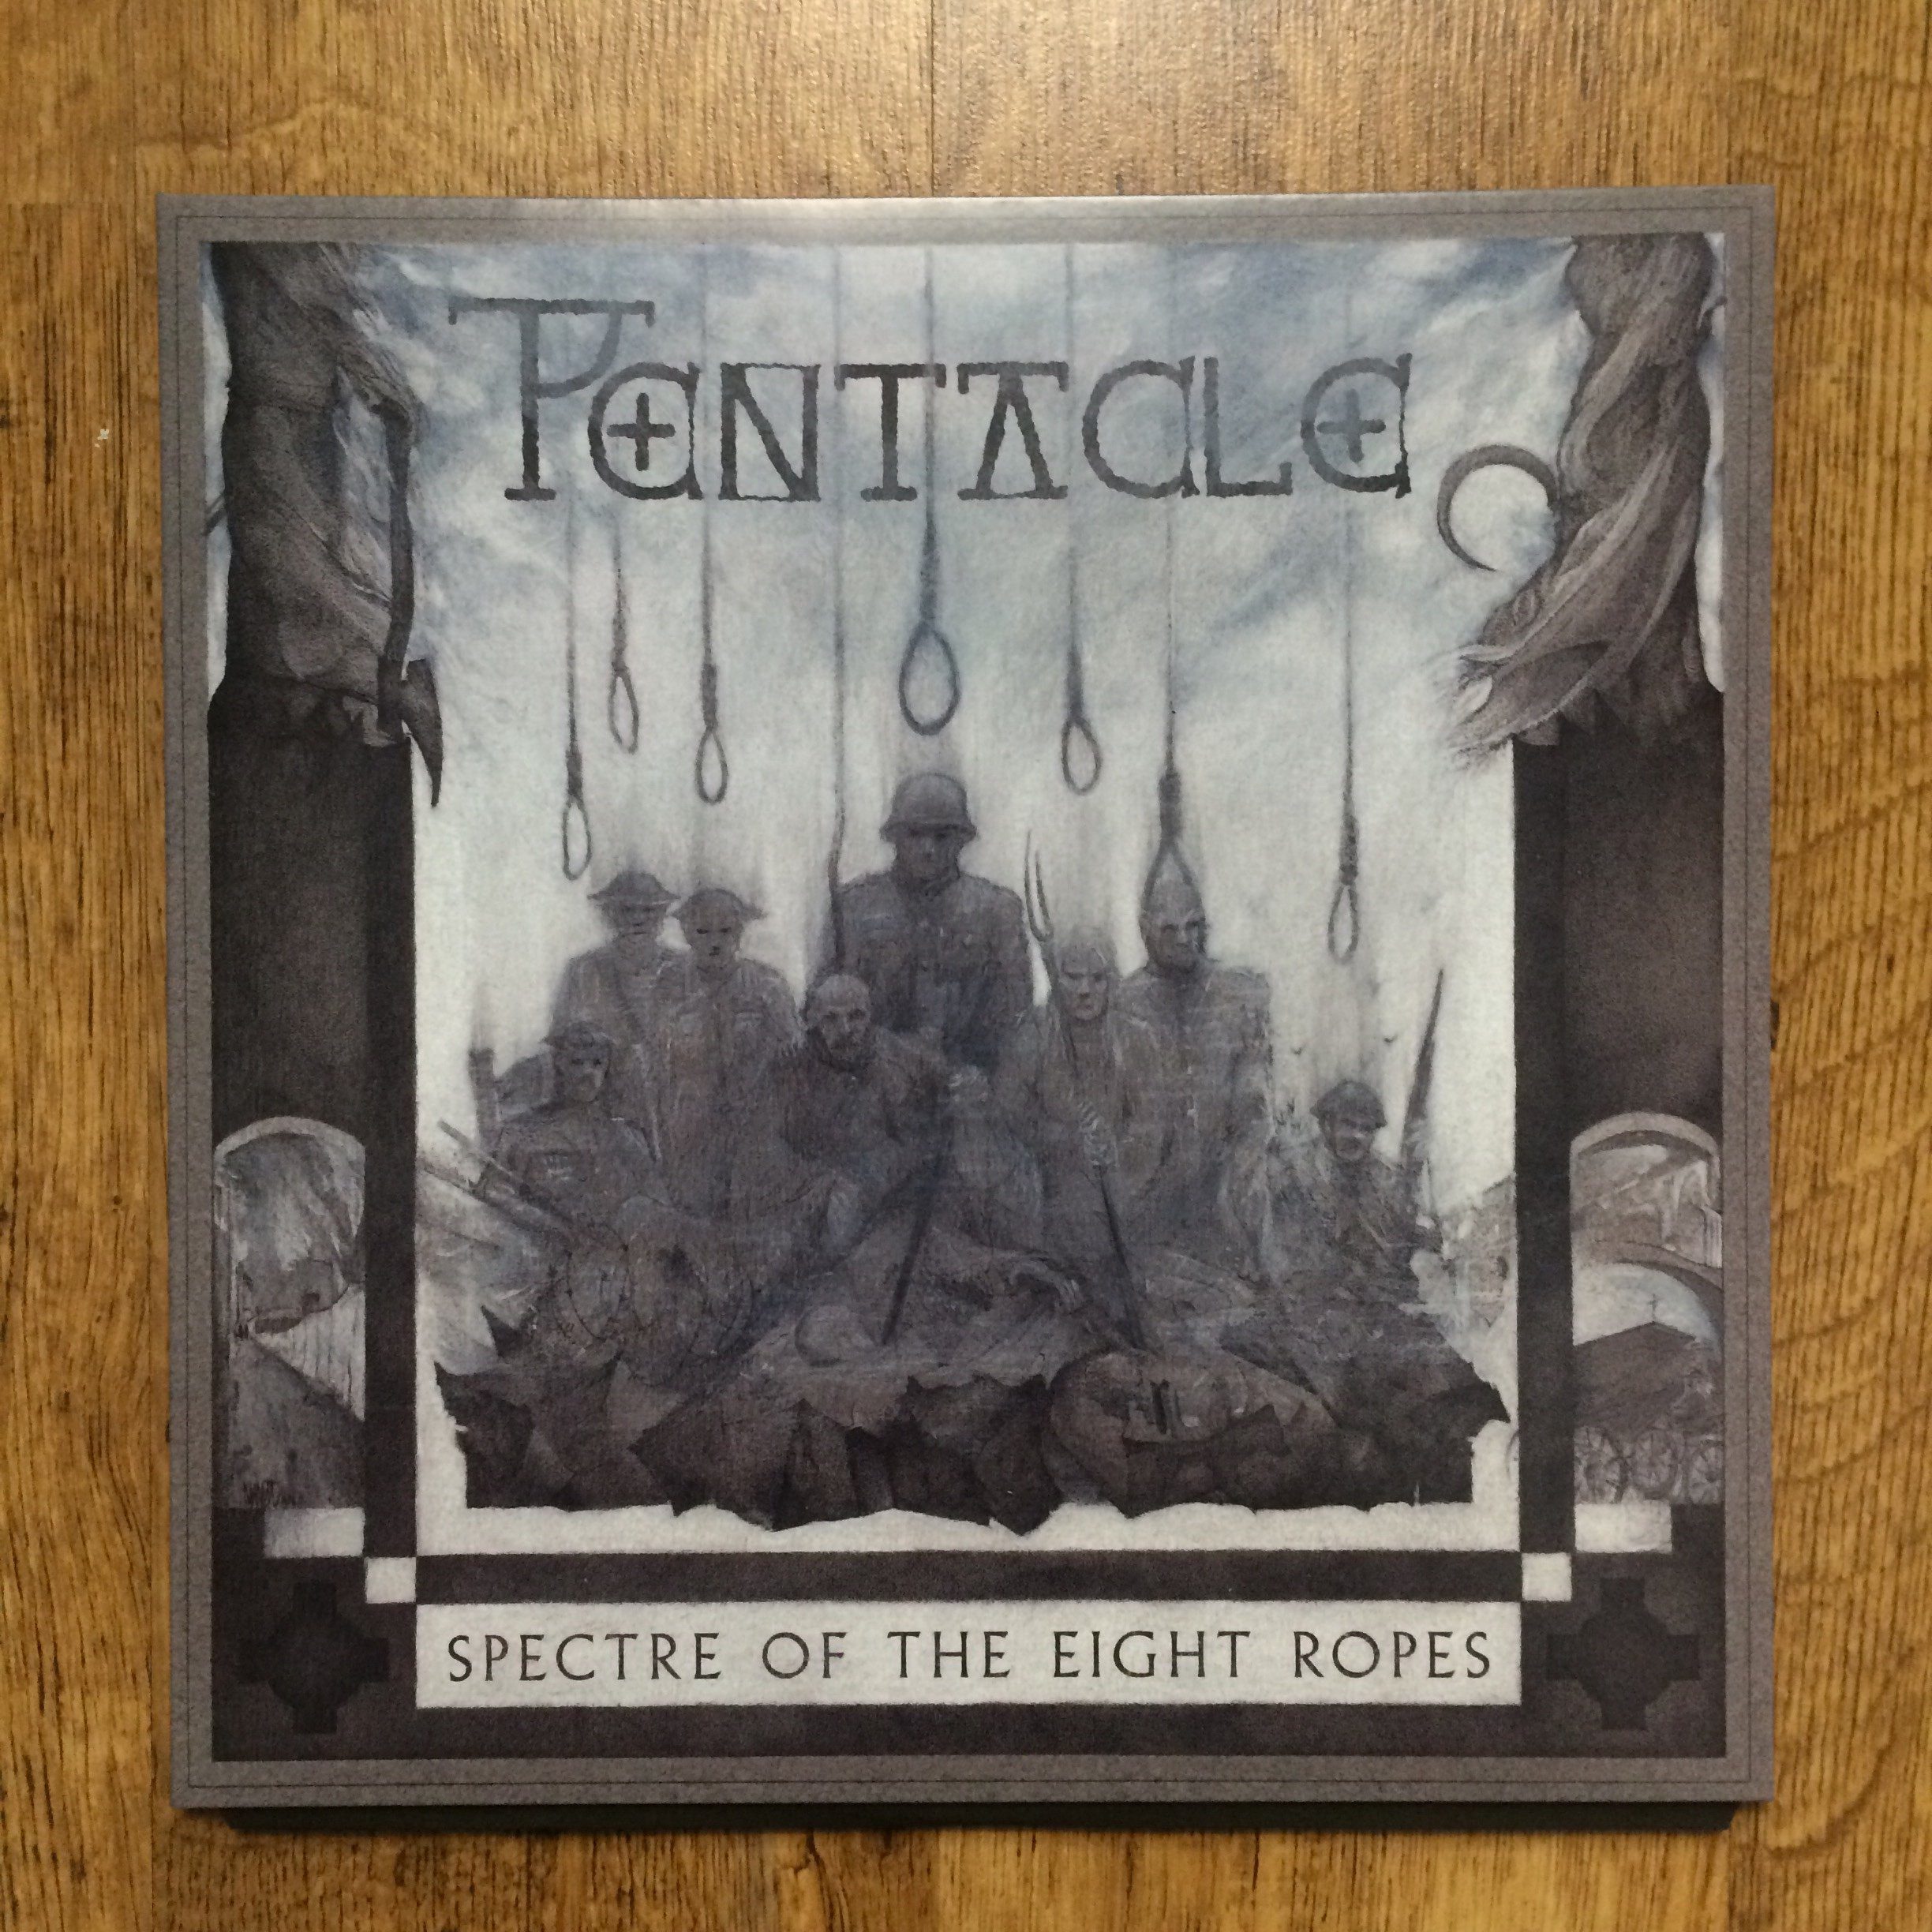 Photo of the Pentacle - "Spectre of the Eight Ropes" LP (Black vinyl)